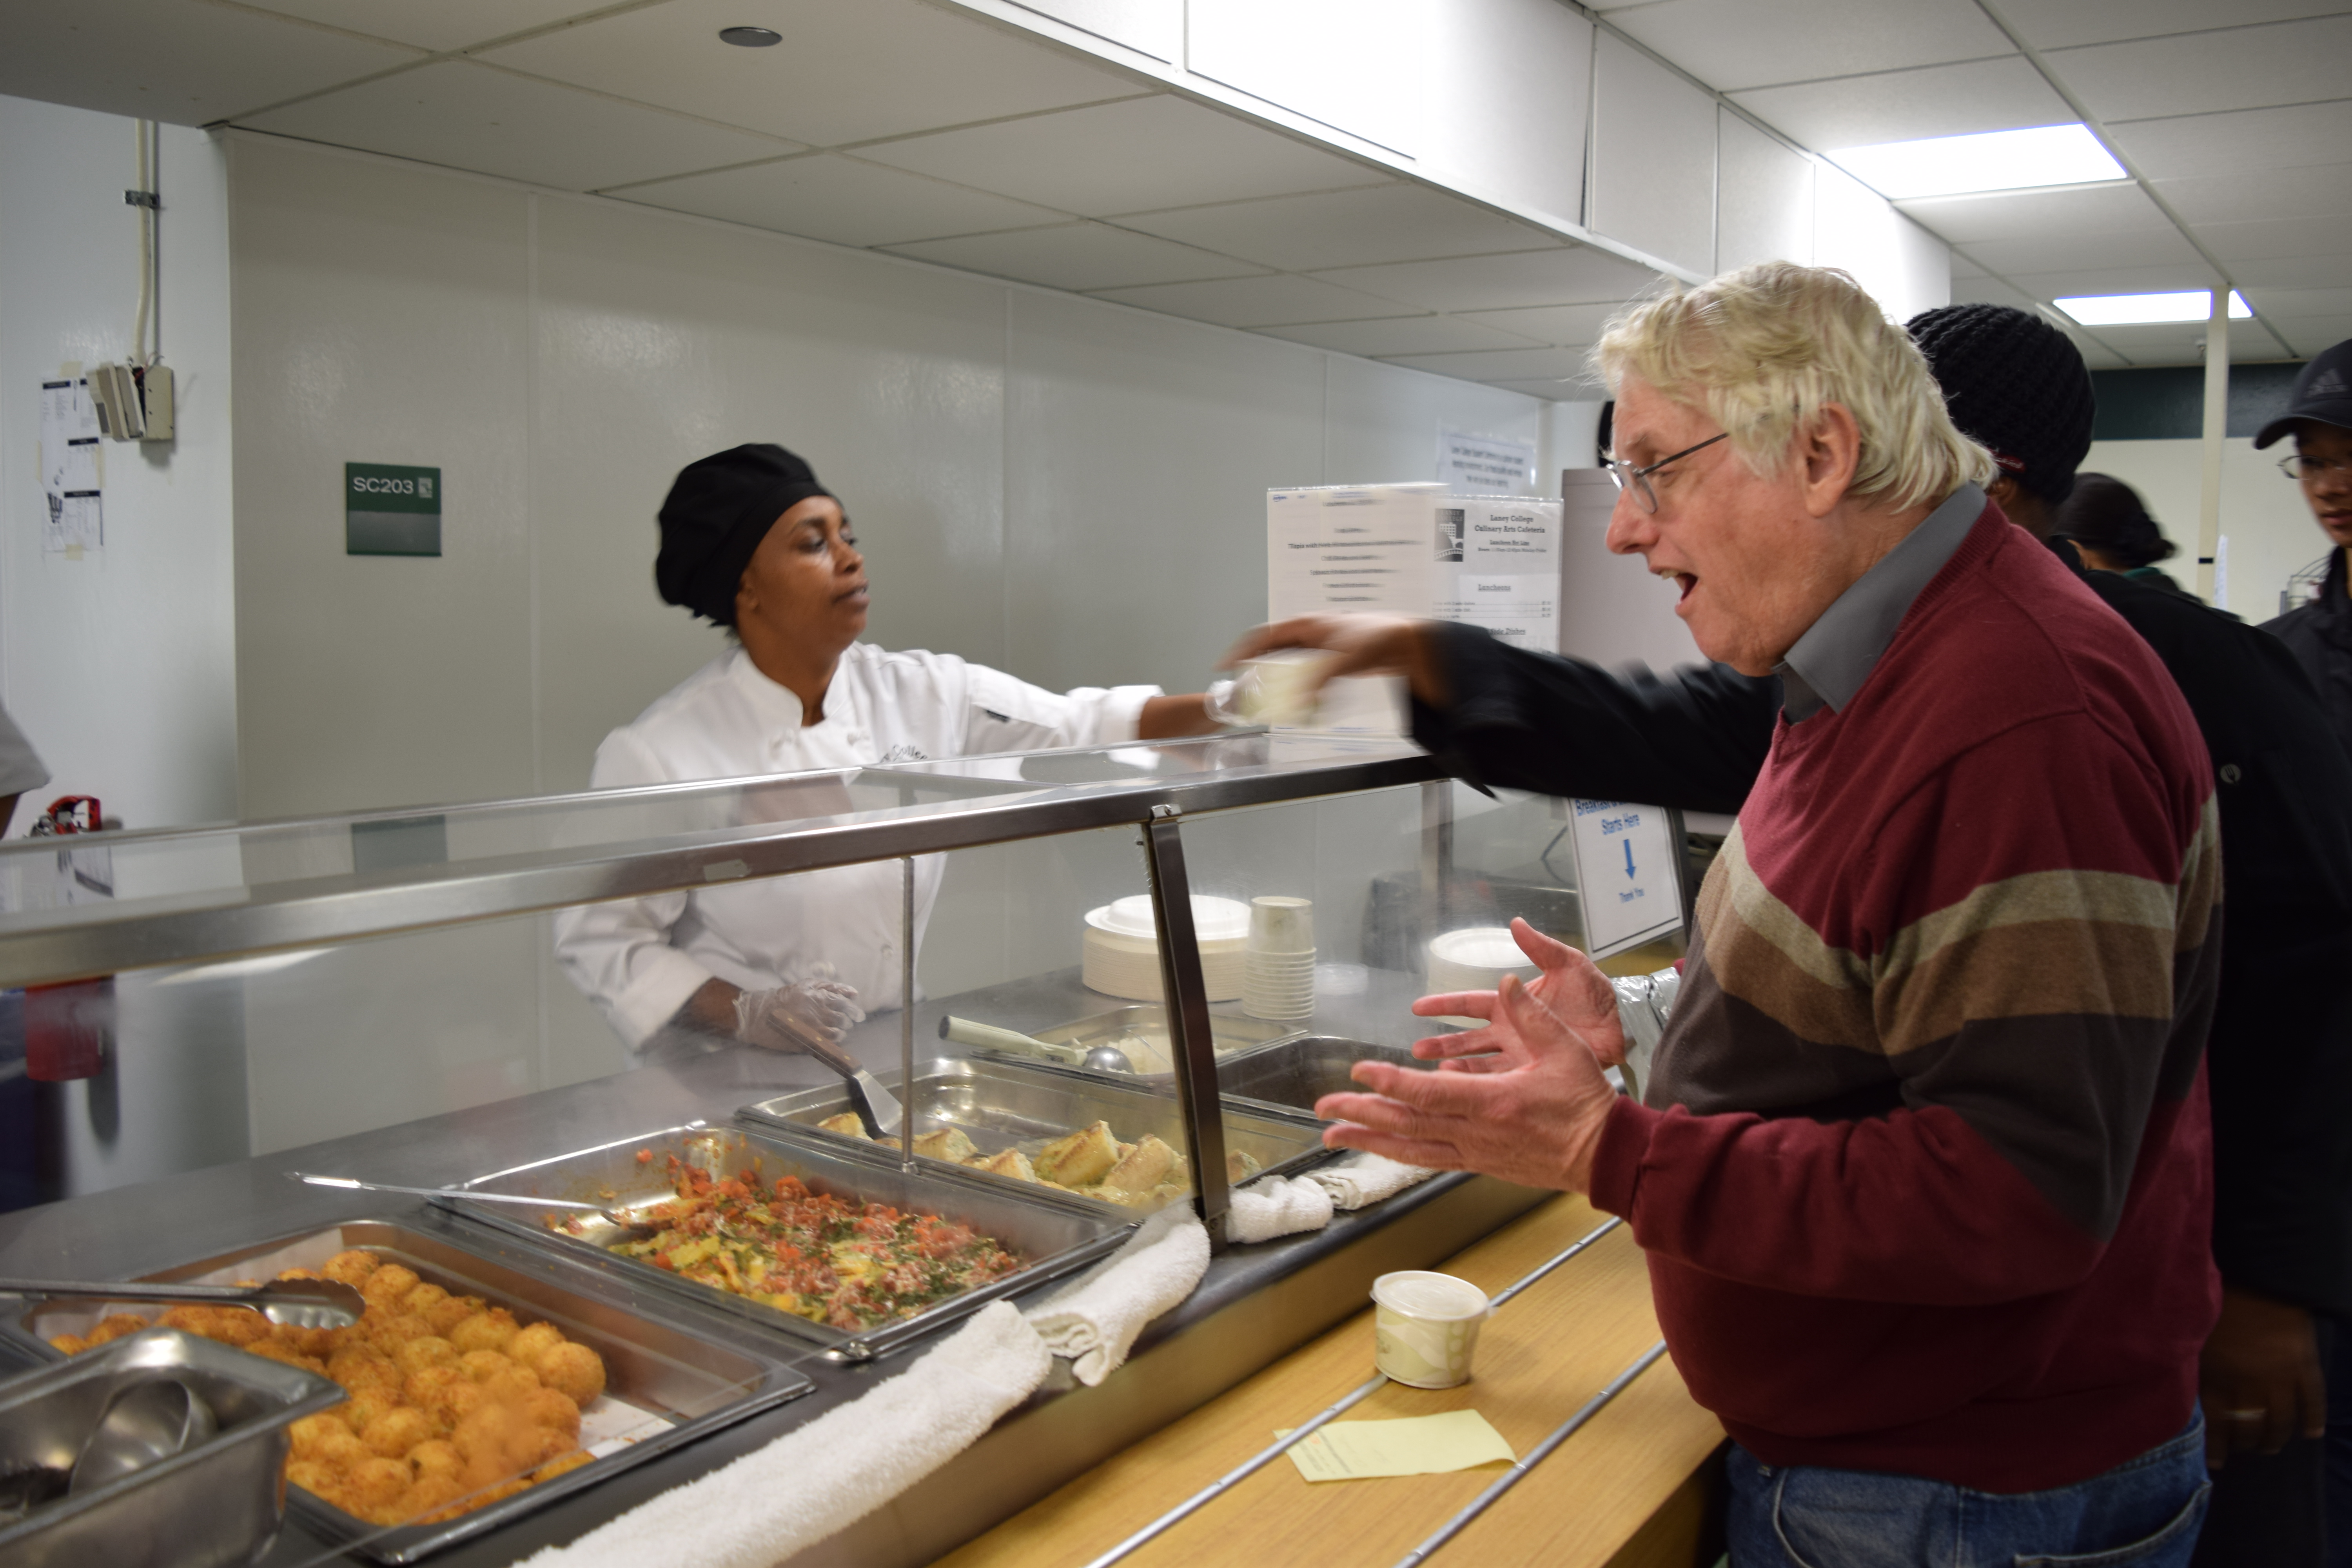 Laney college journalism instructor Scott Strains seems happy to see potato croquette as part of the manu that Laney College main cafeteria serves on Nov. 29, 2017. (Photo by Barbara Muniz) 